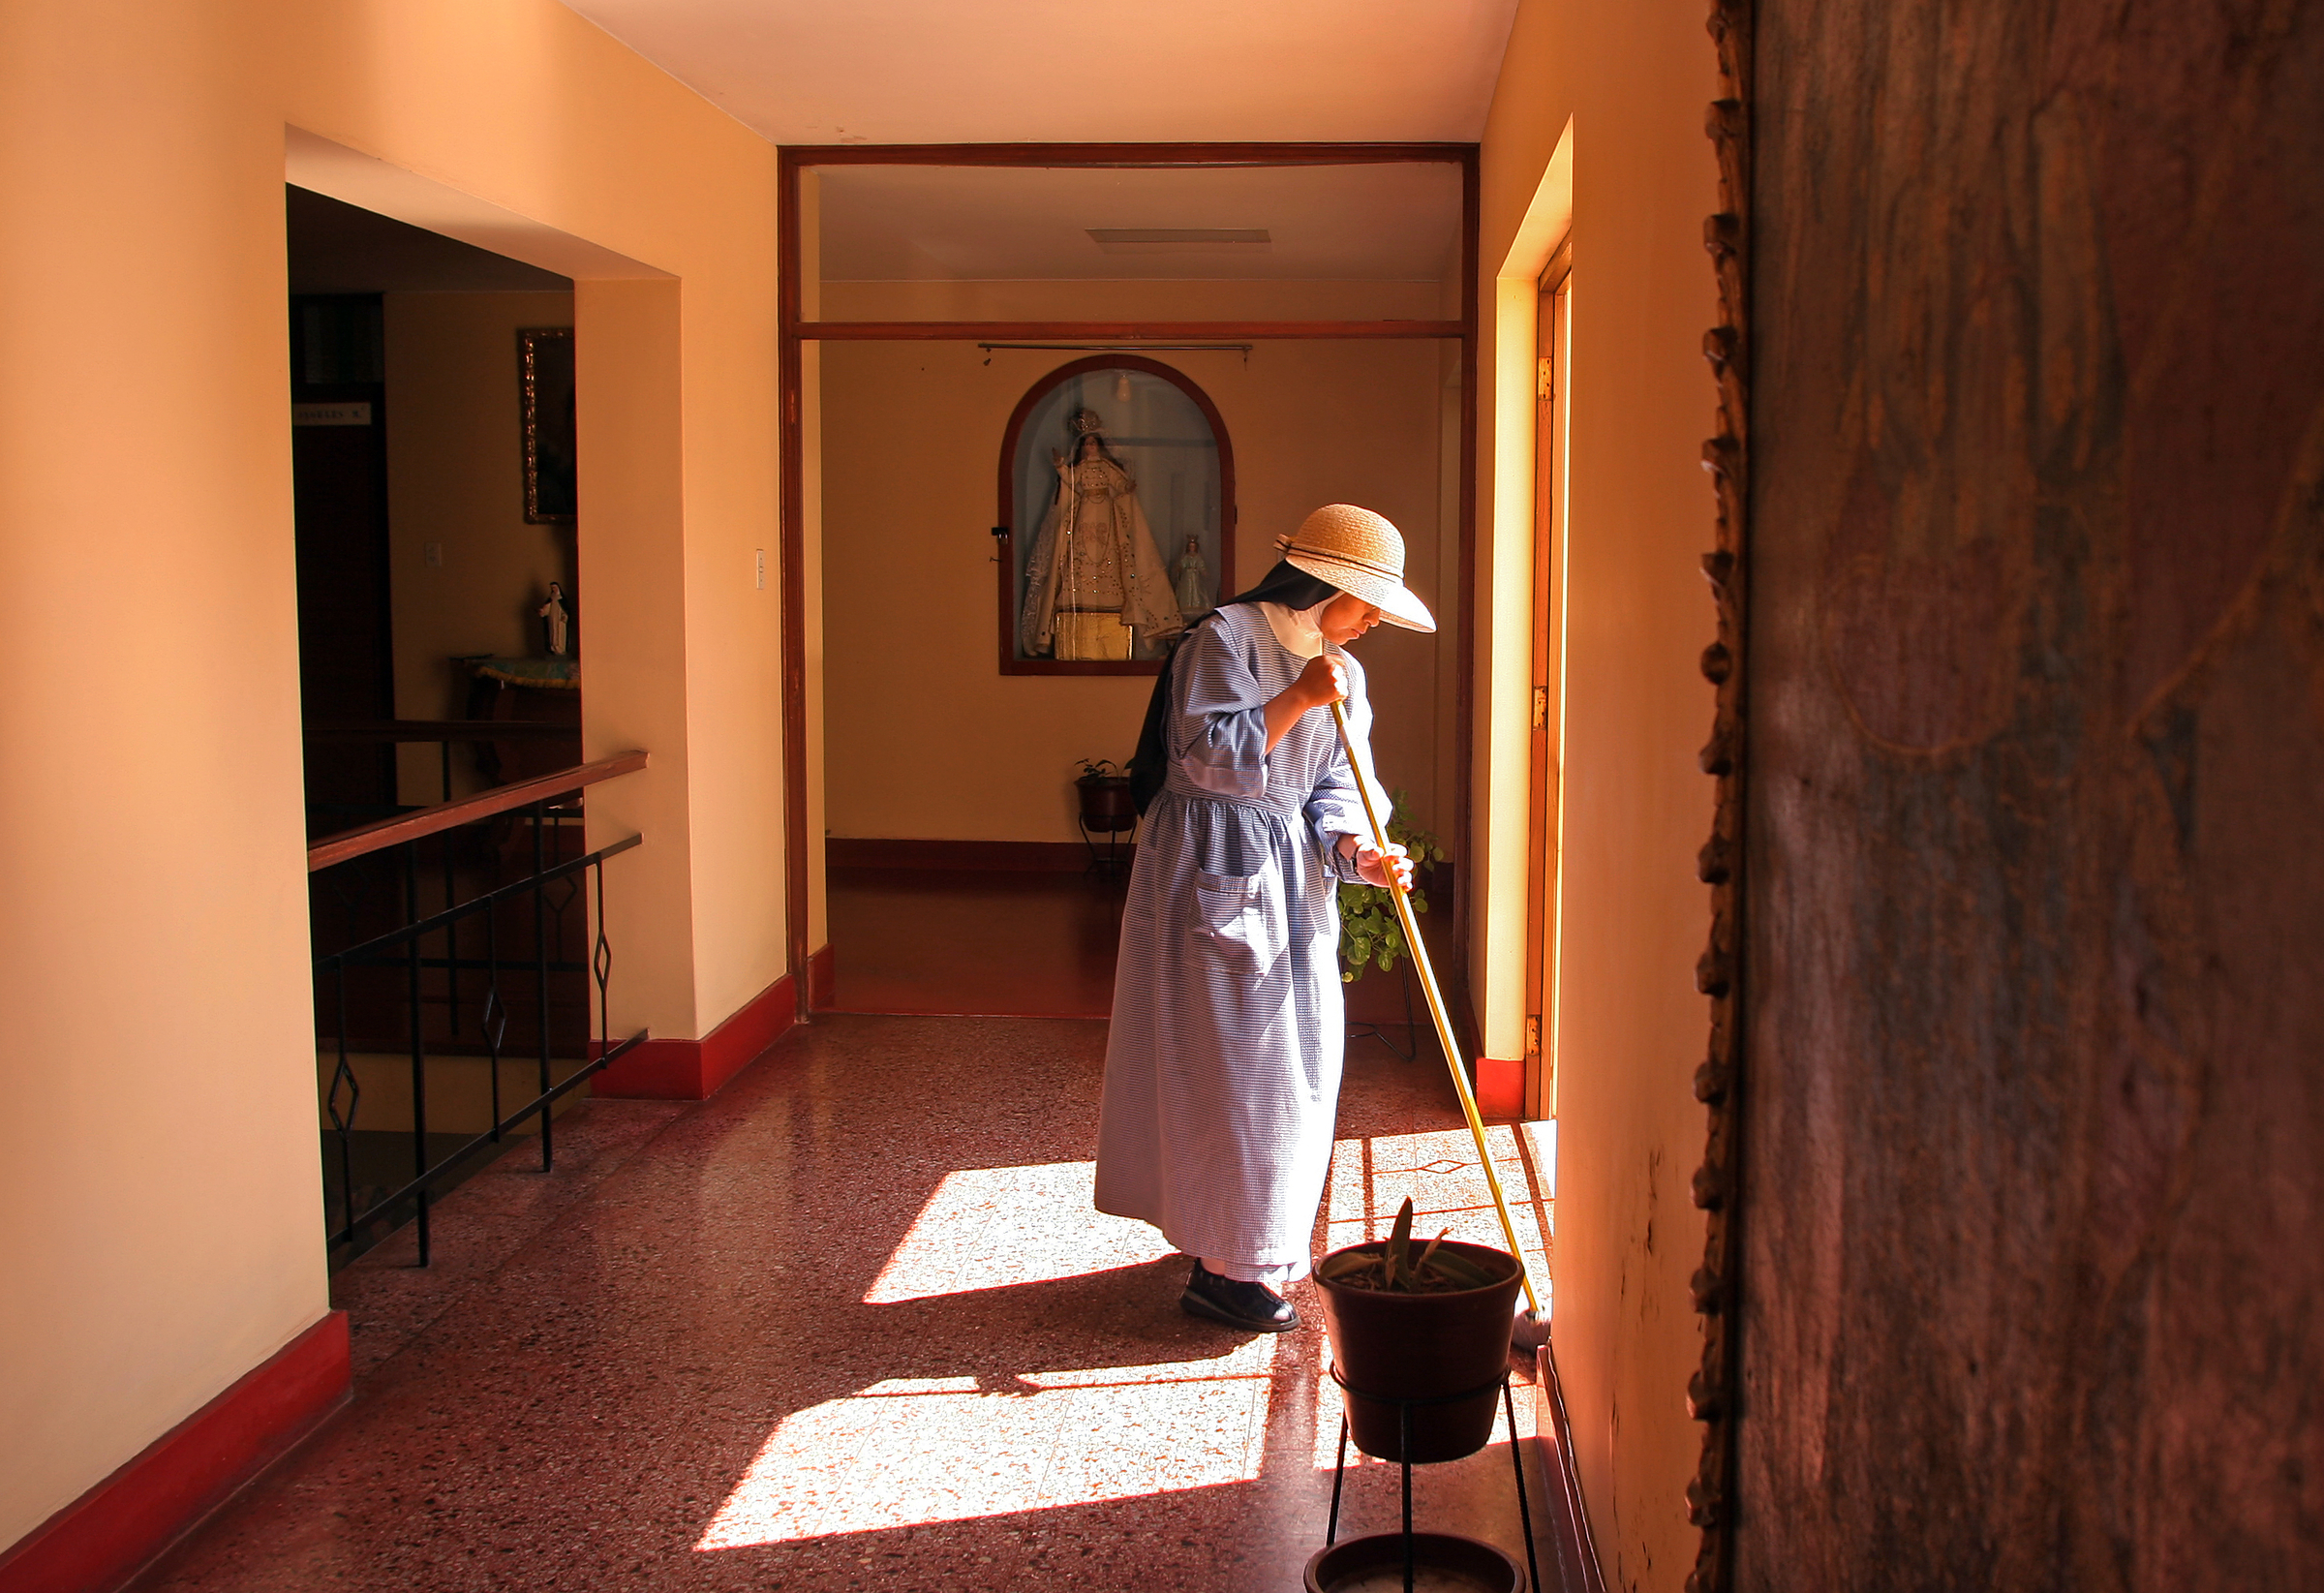  A nun mops the floor in the dormitory area of the monastery. 